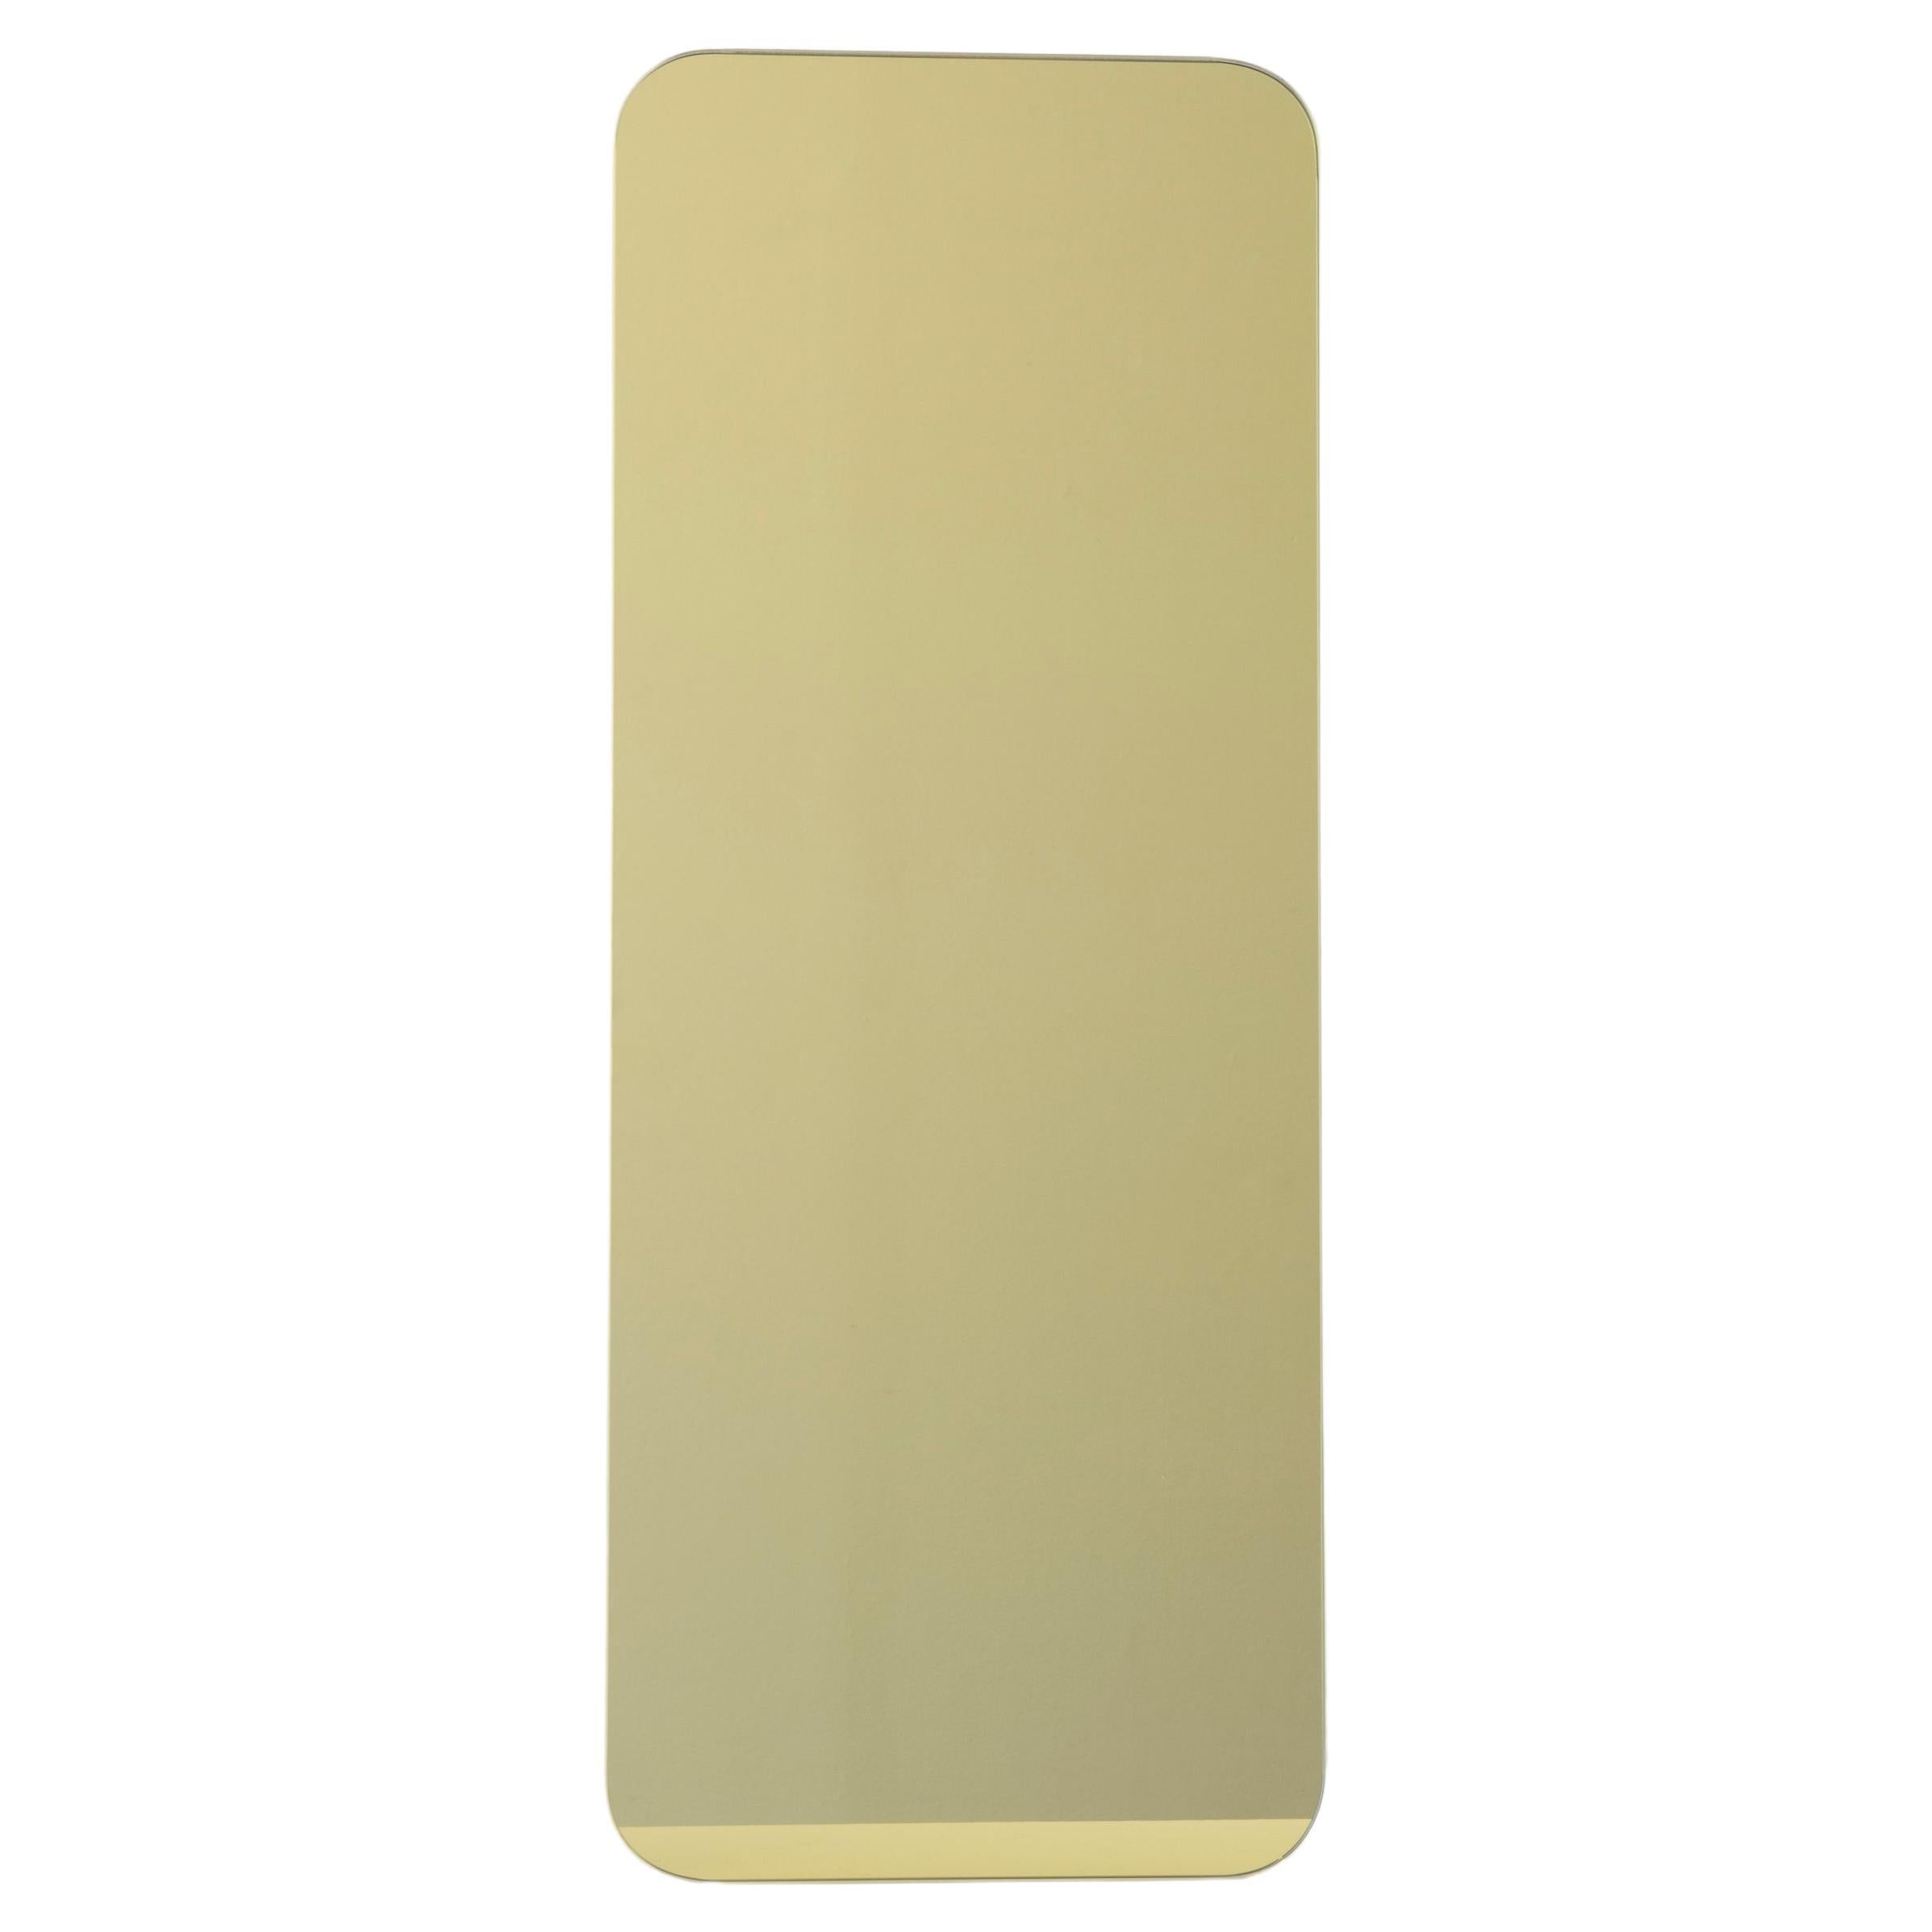 Quadris Gold Rectangular Frameless Contemporary Mirror with Floating Effect, XL